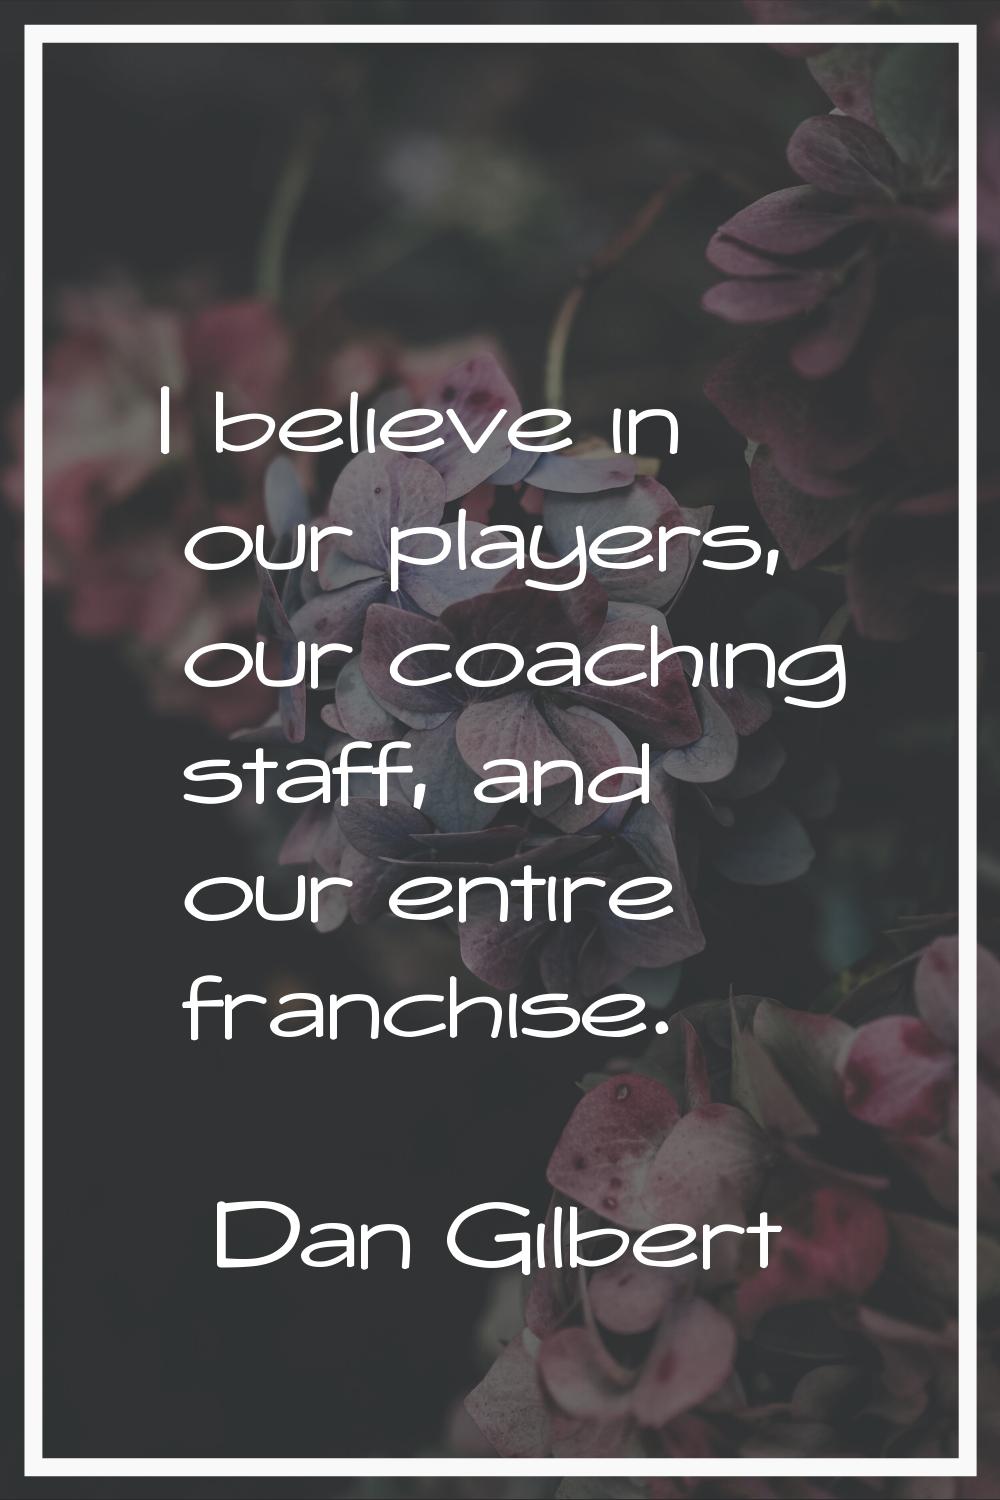 I believe in our players, our coaching staff, and our entire franchise.